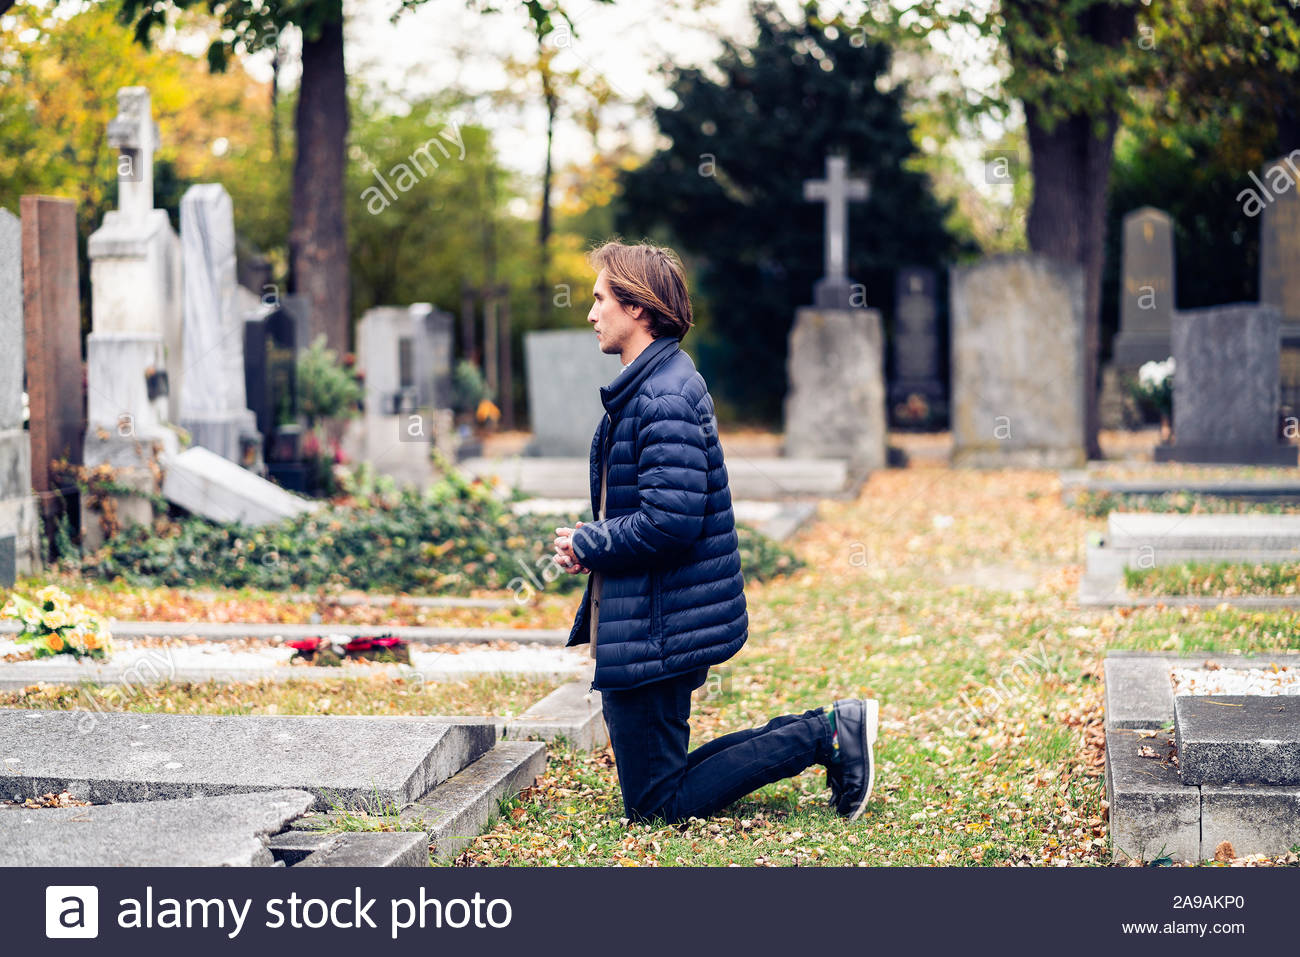 mourning-young-man-kneeling-in-front-of-a-grave-on-a-cemetery-during-a-sad-autumn-day-2A9AKP0.jpg